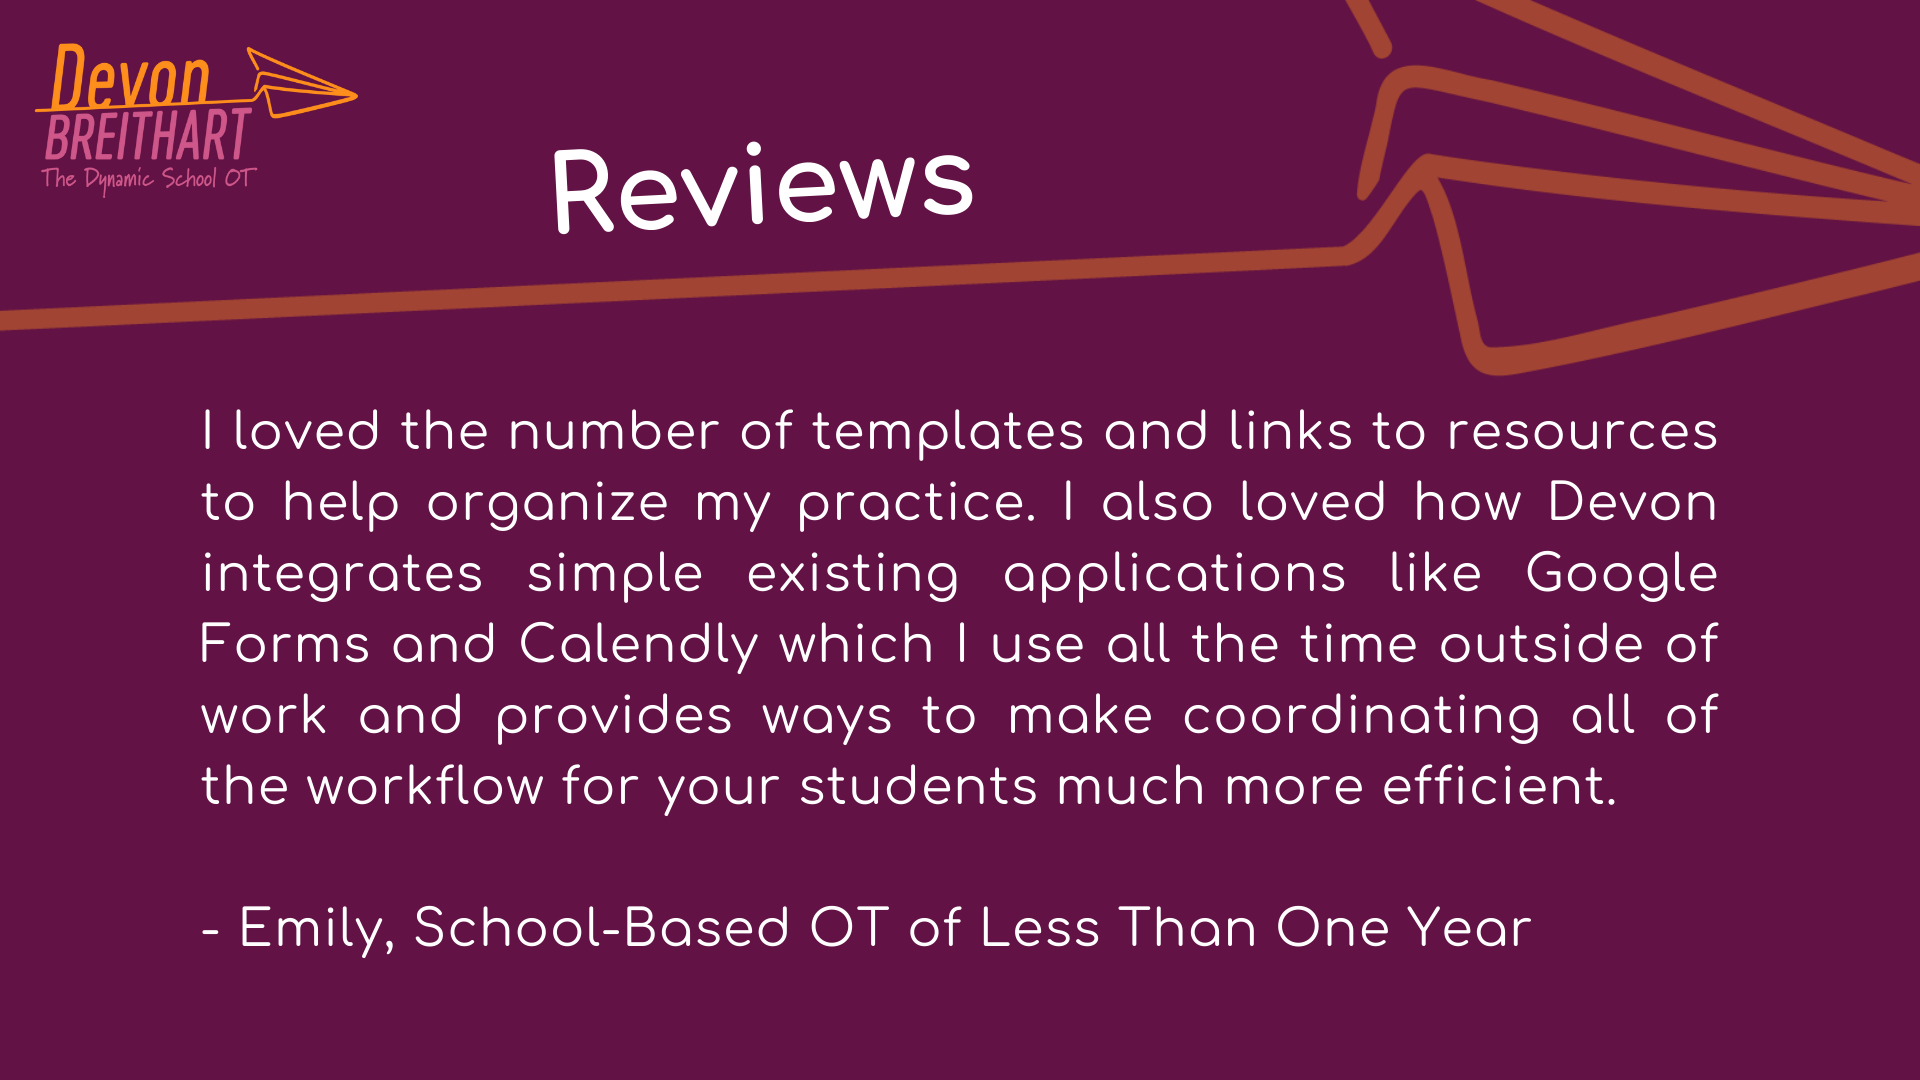 Review of The Dynamic School OT